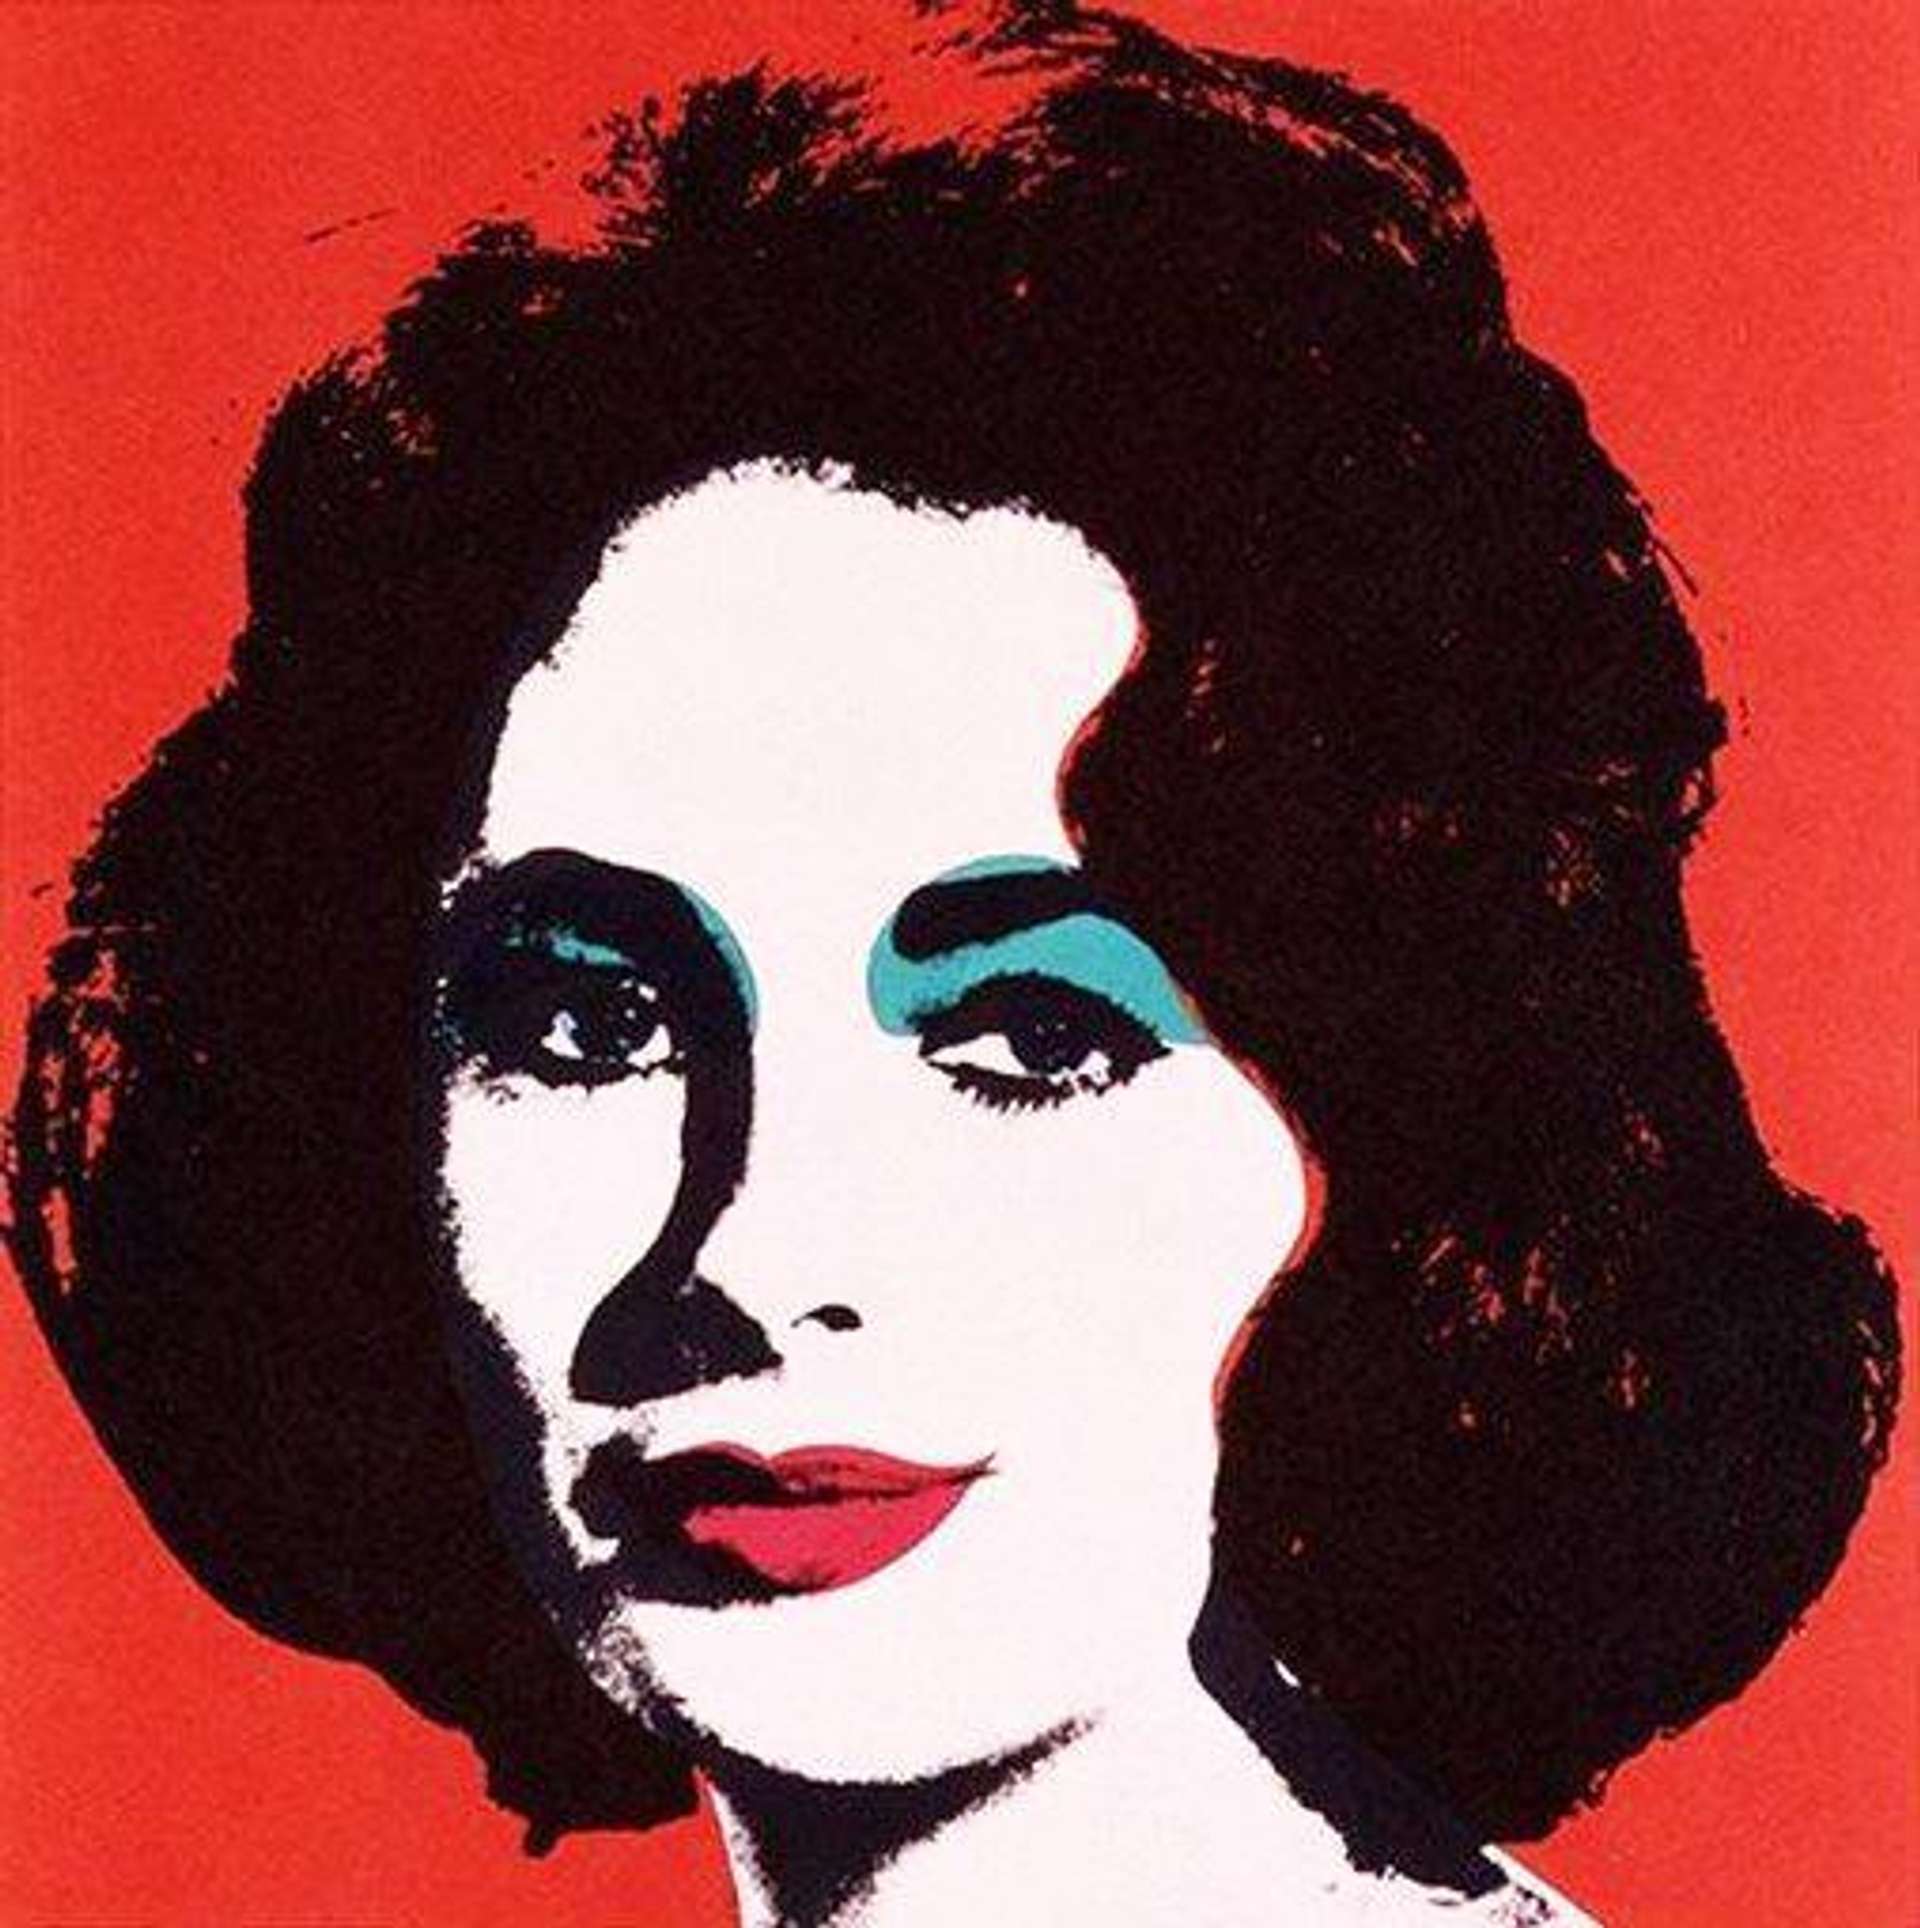 Andy Warhol’s Liz. A Pop Art screenprint of Elizabeth Taylor. Her lips are coloured in with red and her eyelids are coloured in with blue. She is set against a red background.